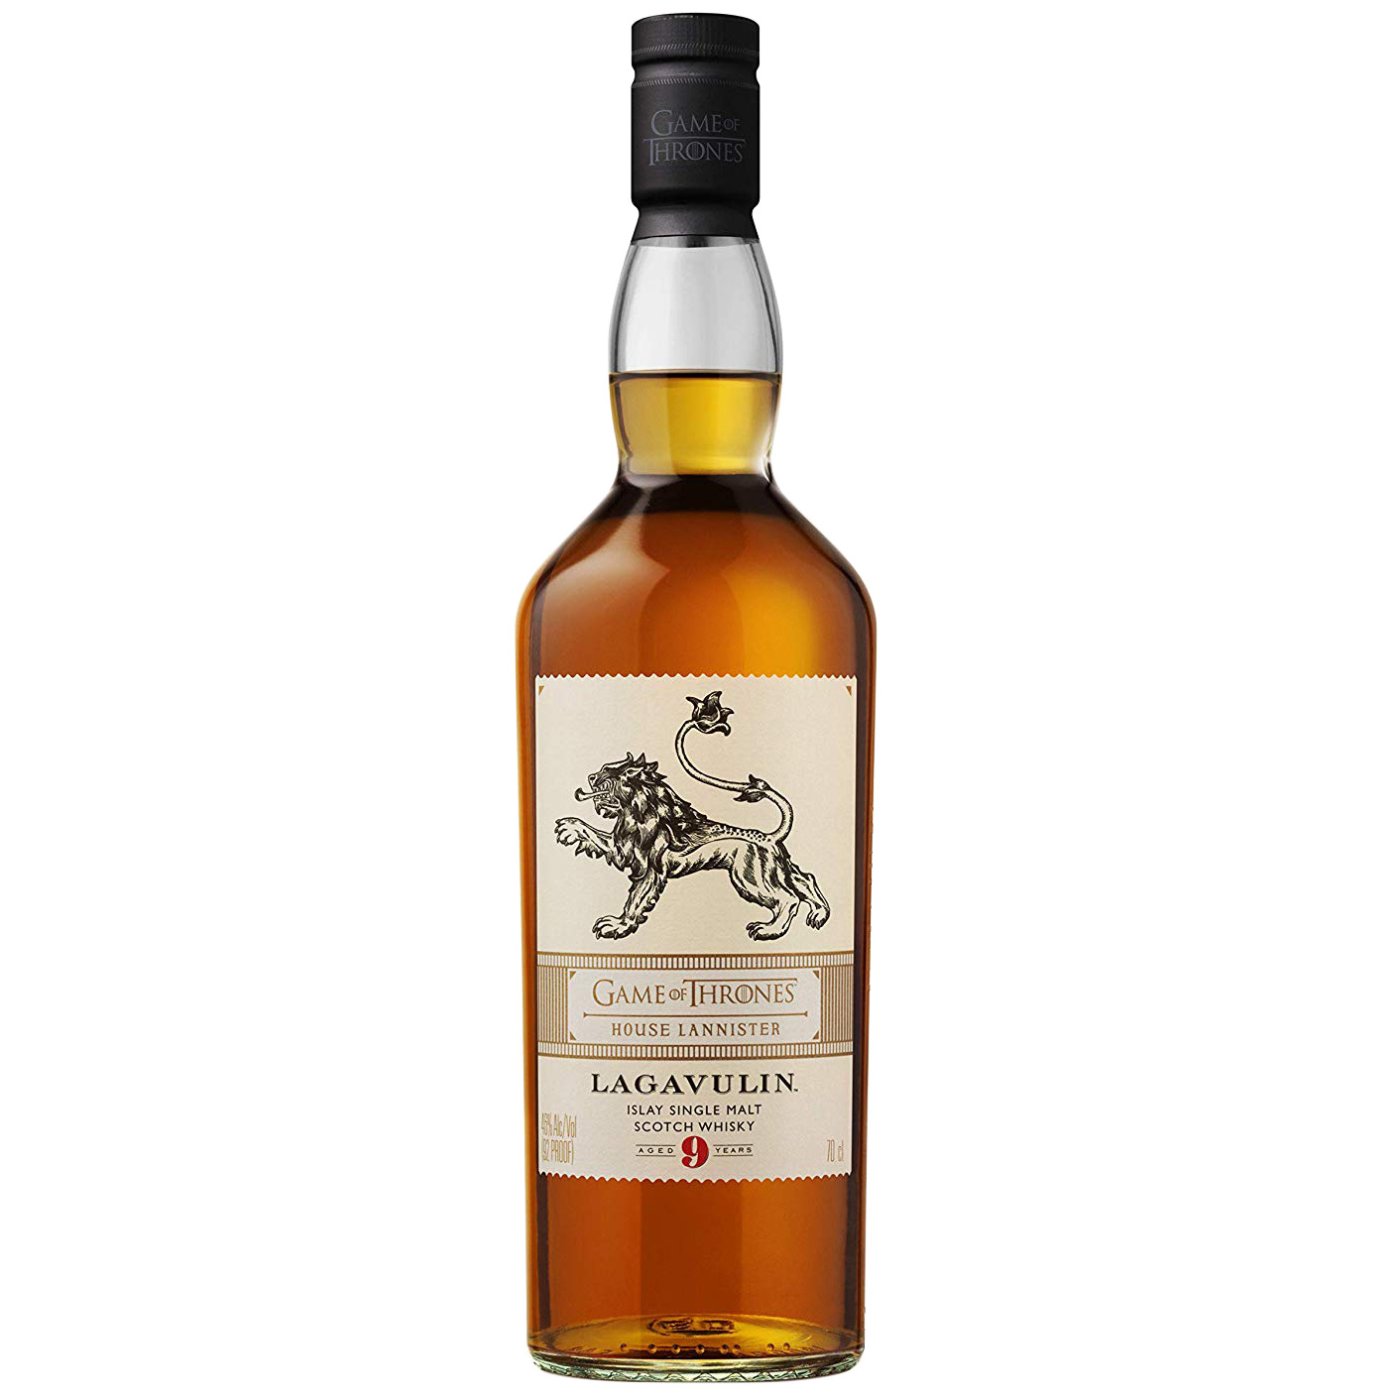 Lagavulin, 9 years - Game of Thrones, House Lannister 70cl